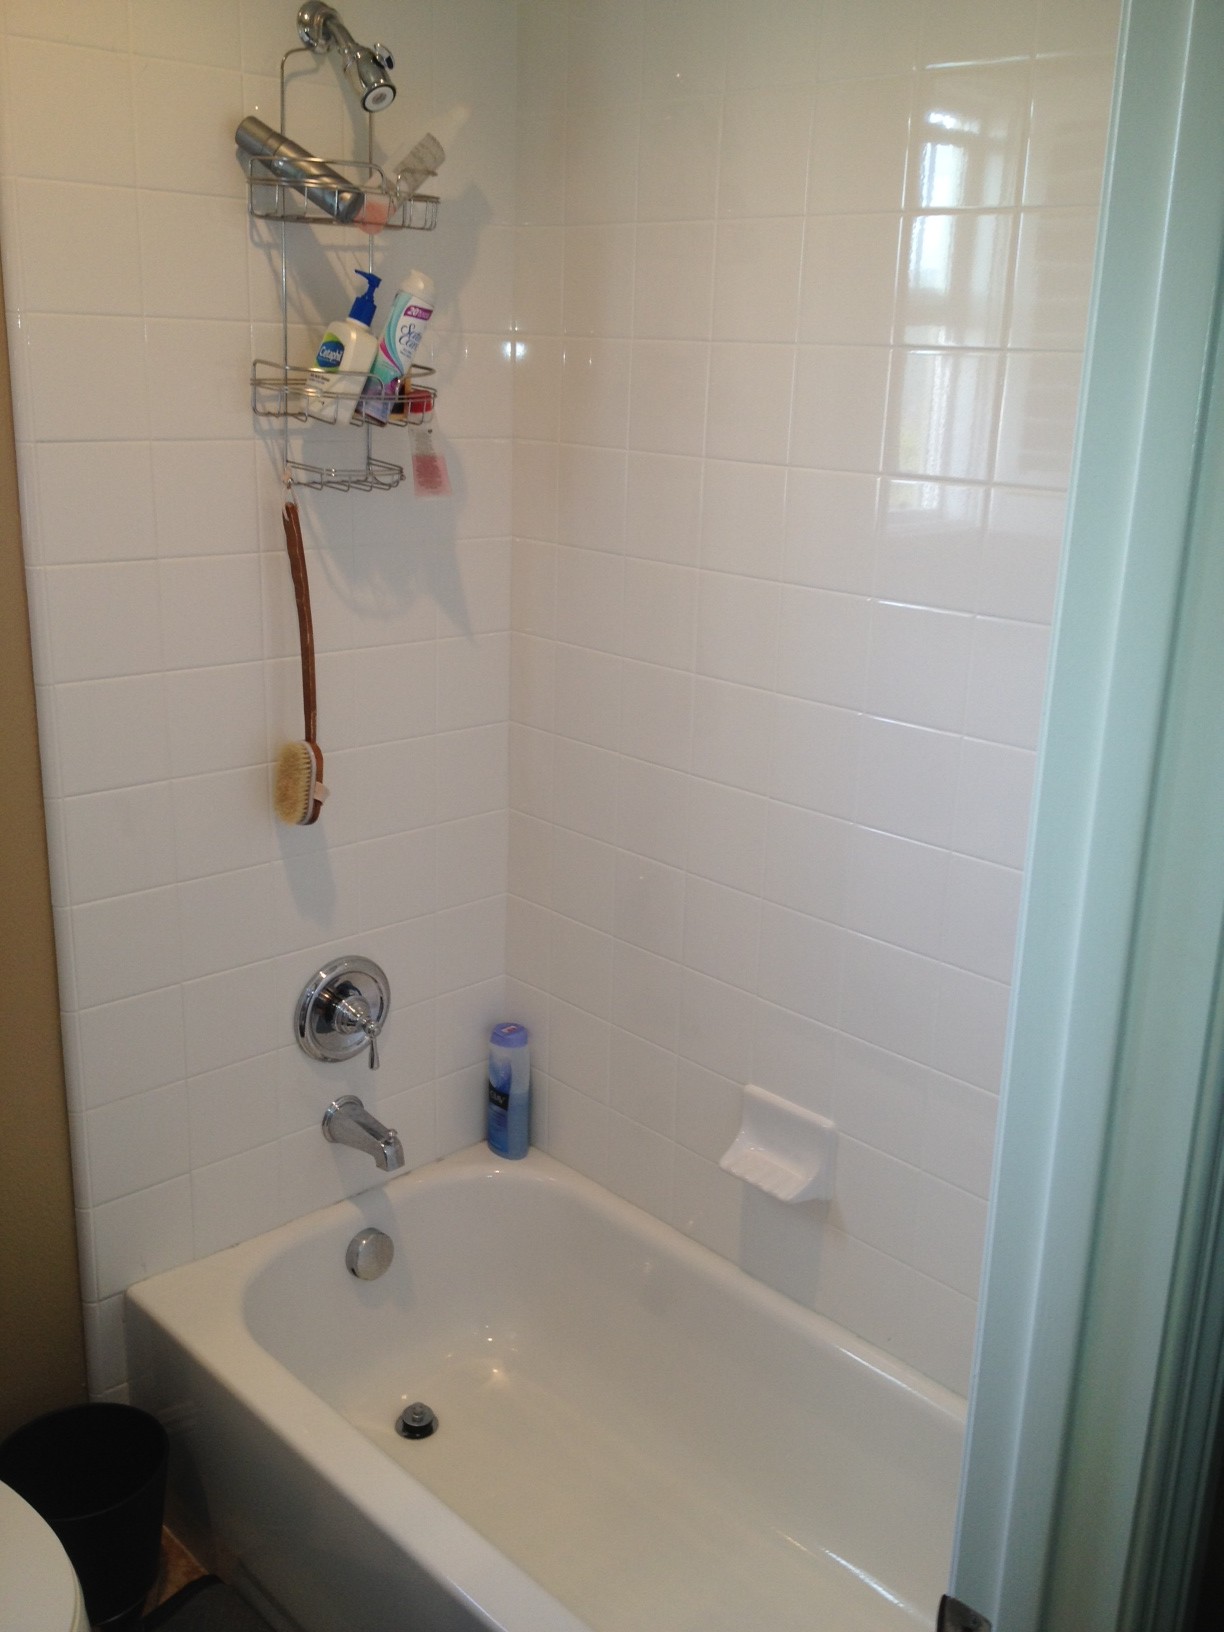 Before - The owner of this home was tired using a shower curtain to keep water out of the tub.